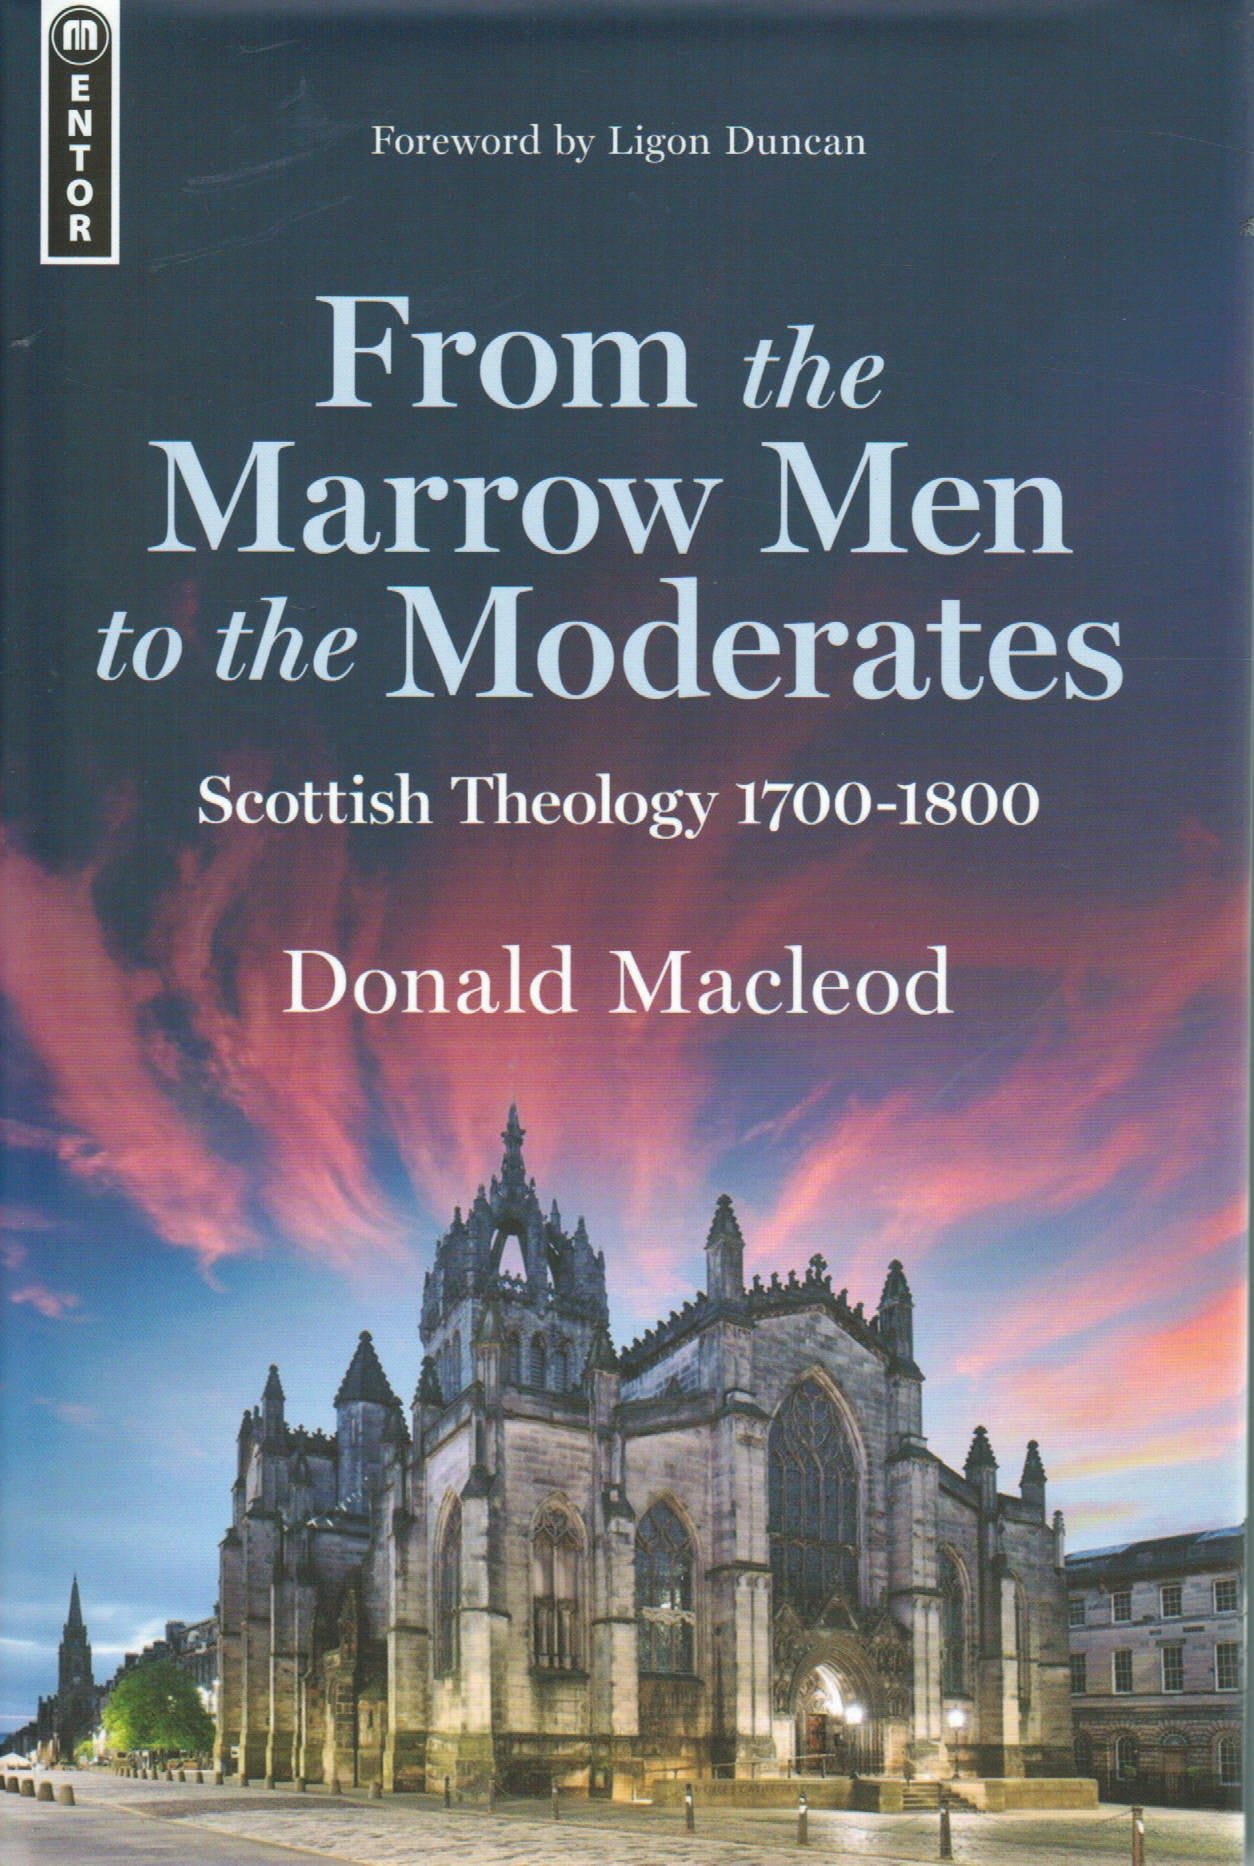 From the Marrow Men to the Moderates: Scottish Theology 1700-1800